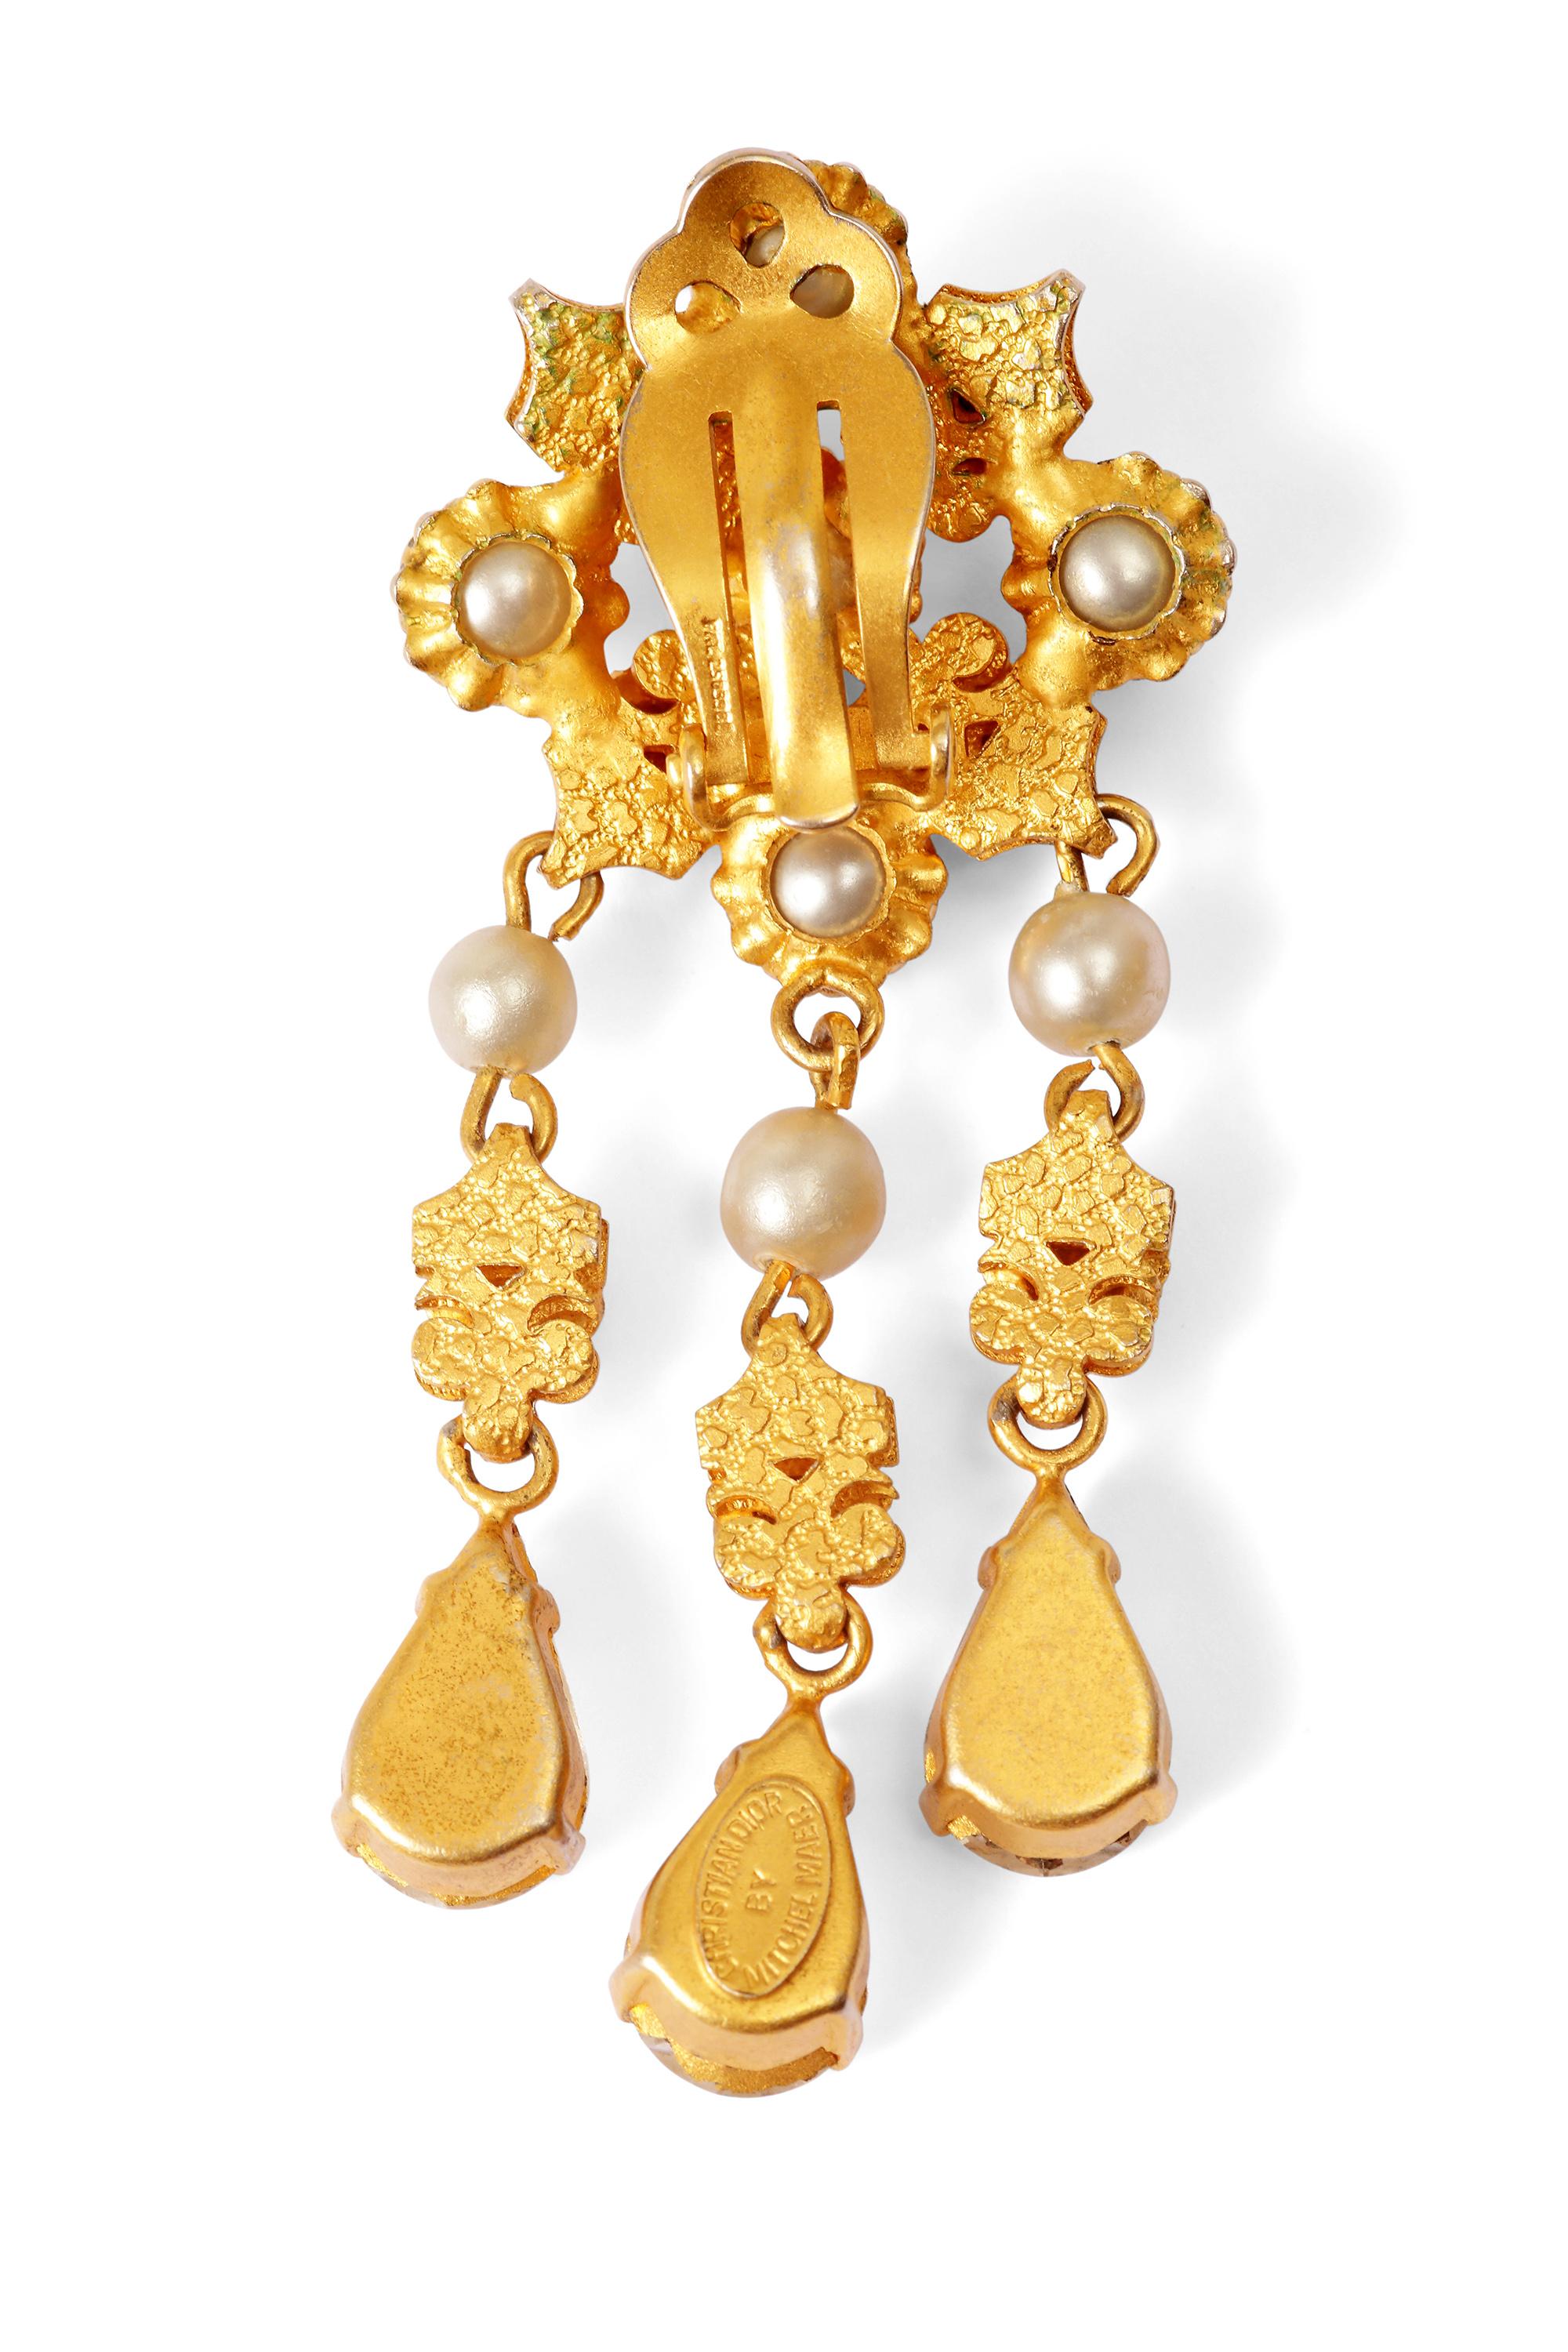 These sensational 1950s crystal teardrop earrings are by Mitchel Maer for Christian Dior and are in superb vintage condition. Each piece is comprised of gold tone metal fashioned into an ornate cluster of prong set crystal rhinestones and